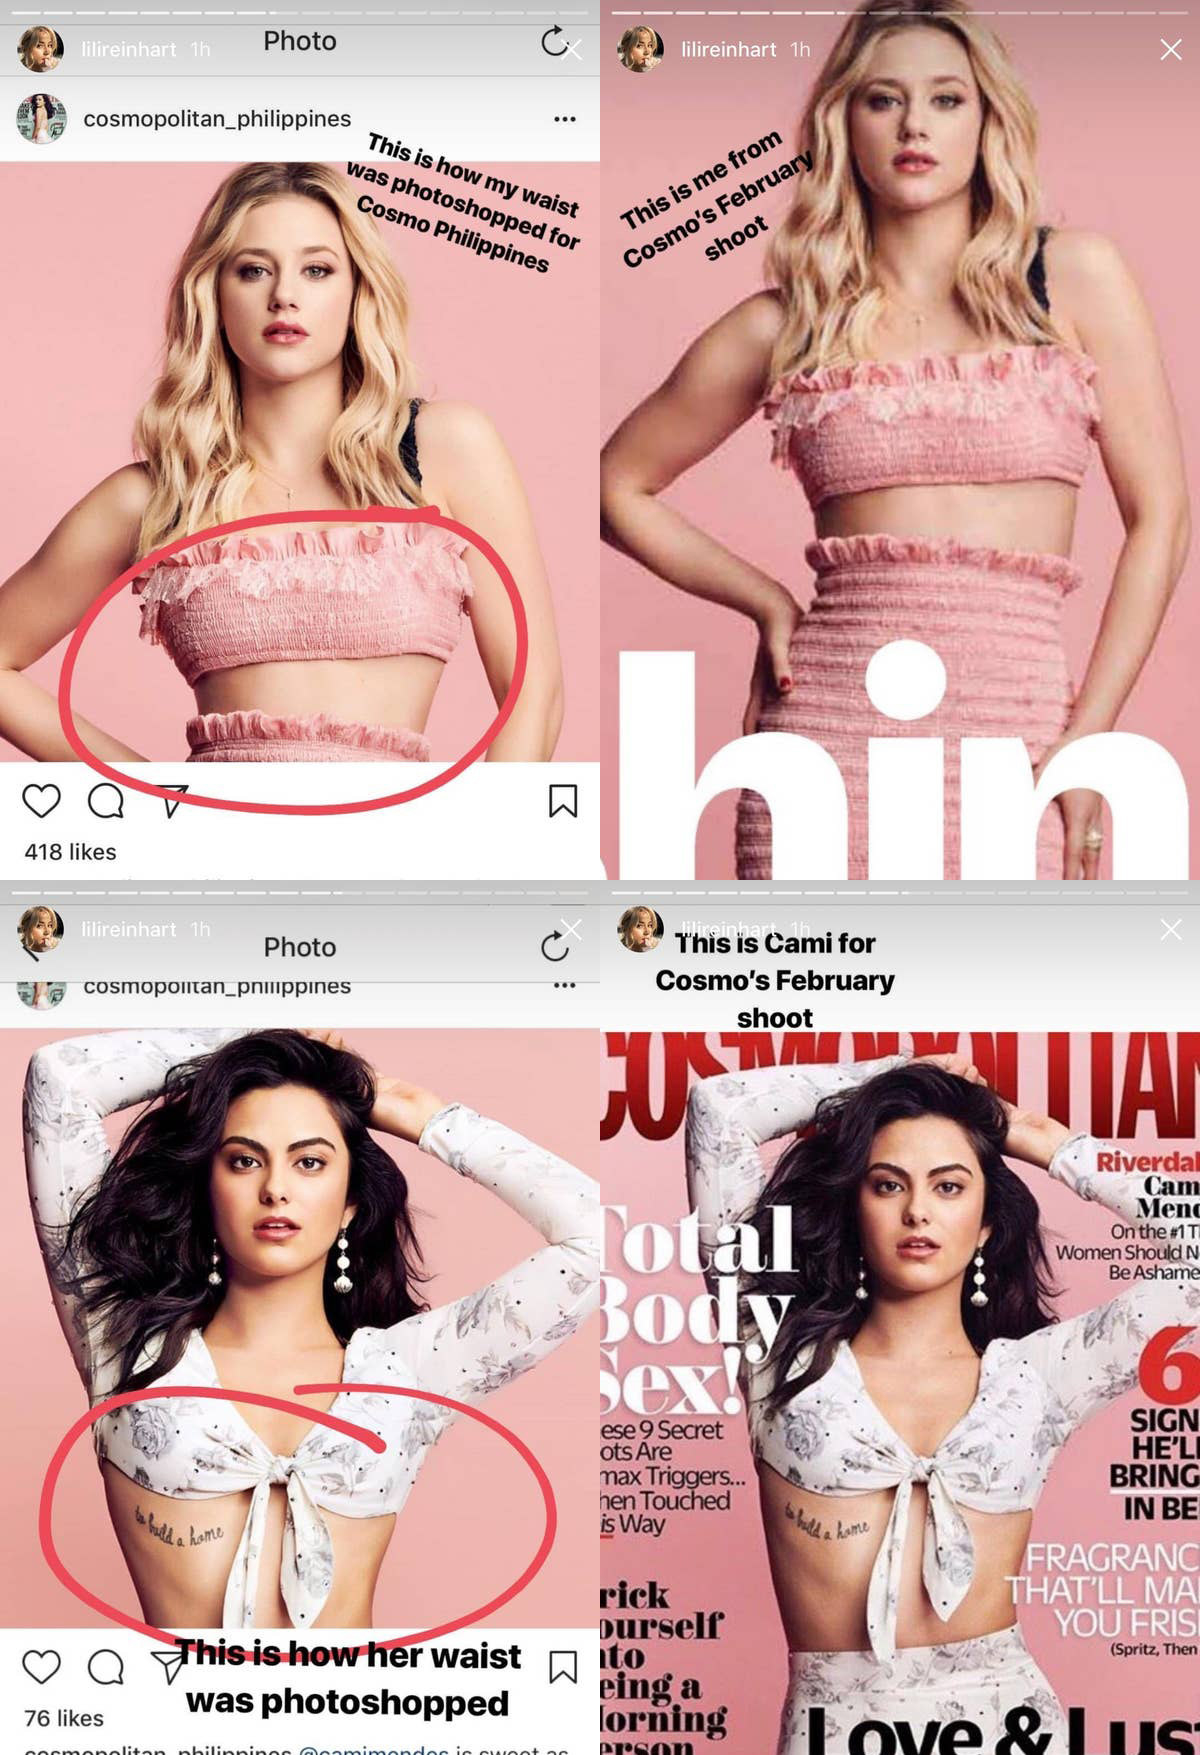 Two sets of side-by-sides with the photoshopped waists of each woman circled in red